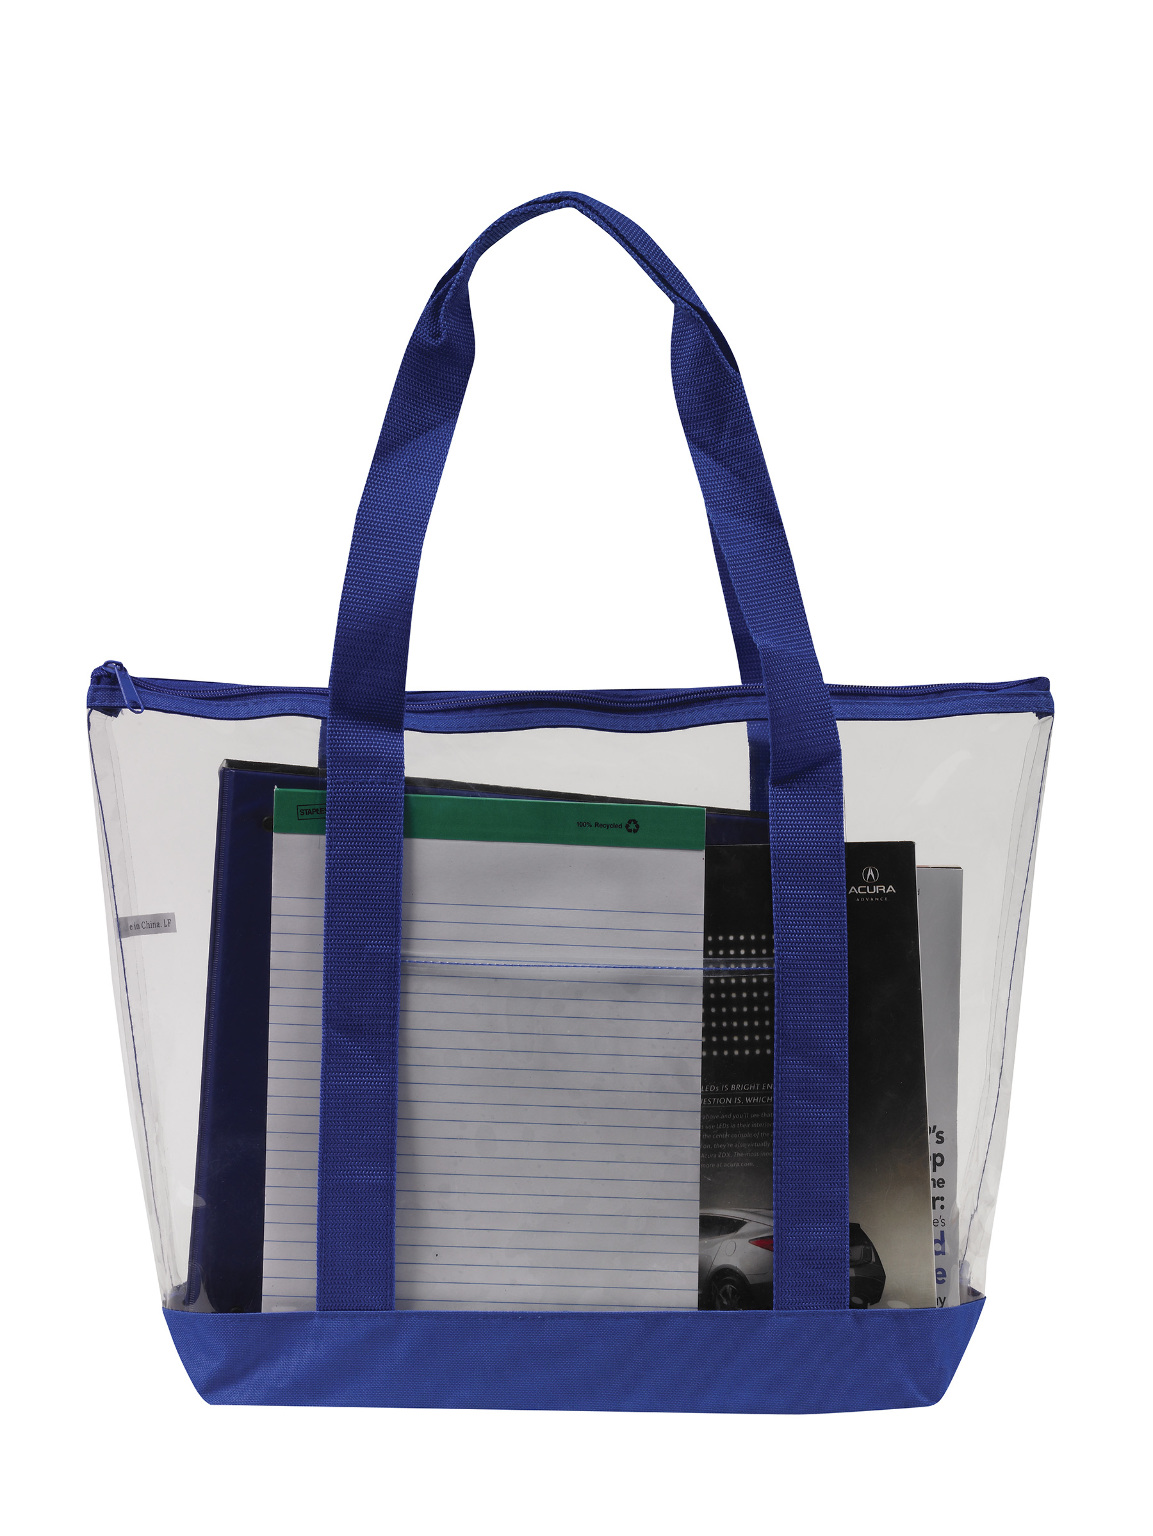 Wholesale Clear Zipper Tote Security Bag with Pocket - Royal (SKU 2326933) DollarDays